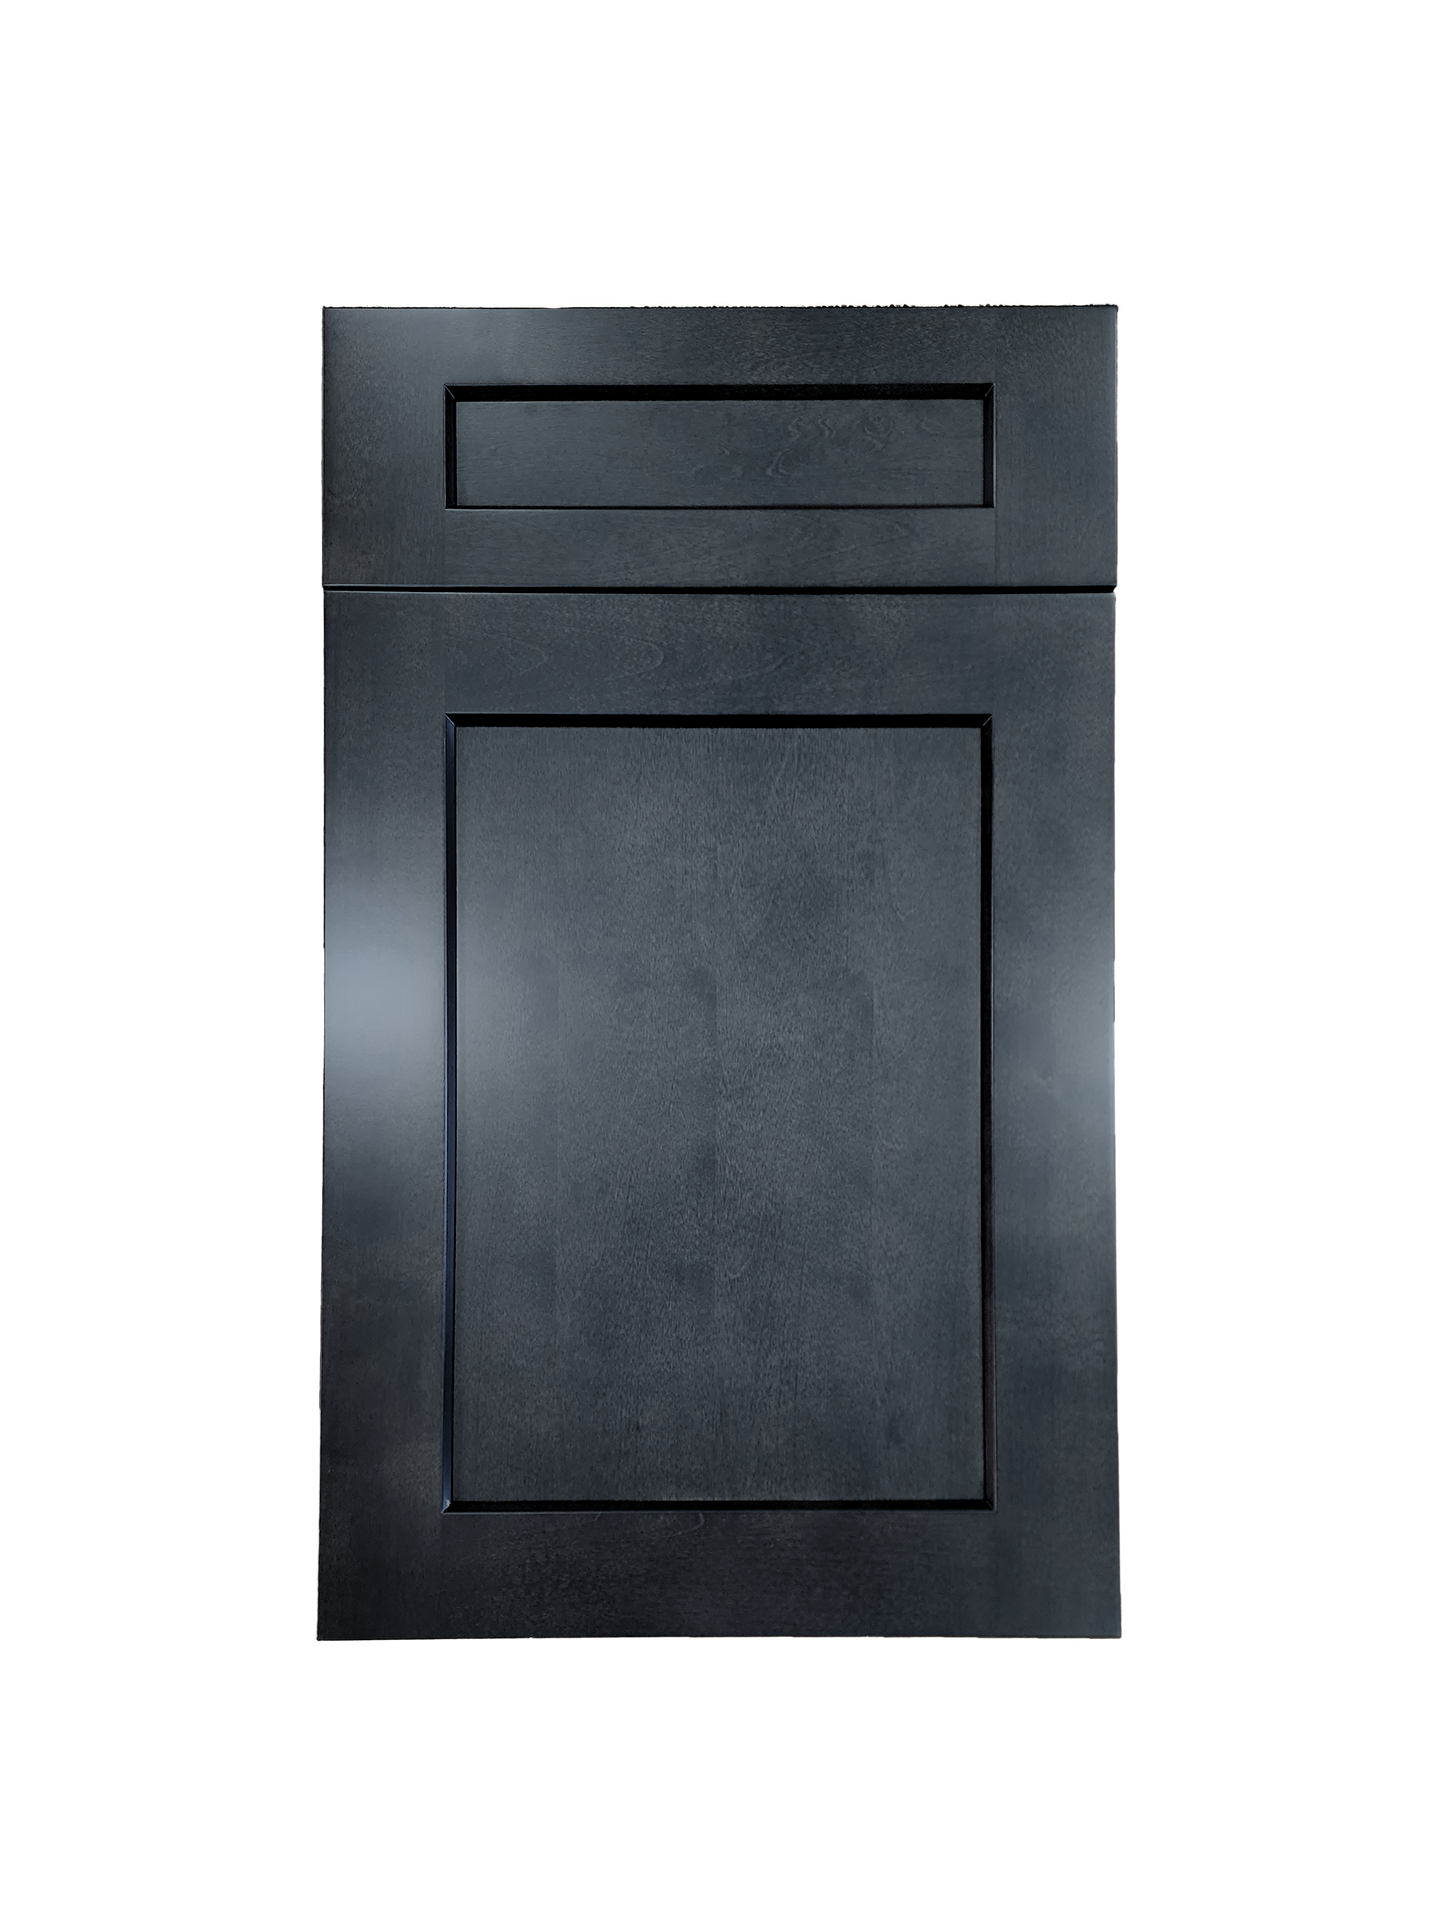 Stormy Grey Wall Cabinet 15 inches wide 12 inches deep 30 inches tall with Stormy Grey box and Stormy Grey doors